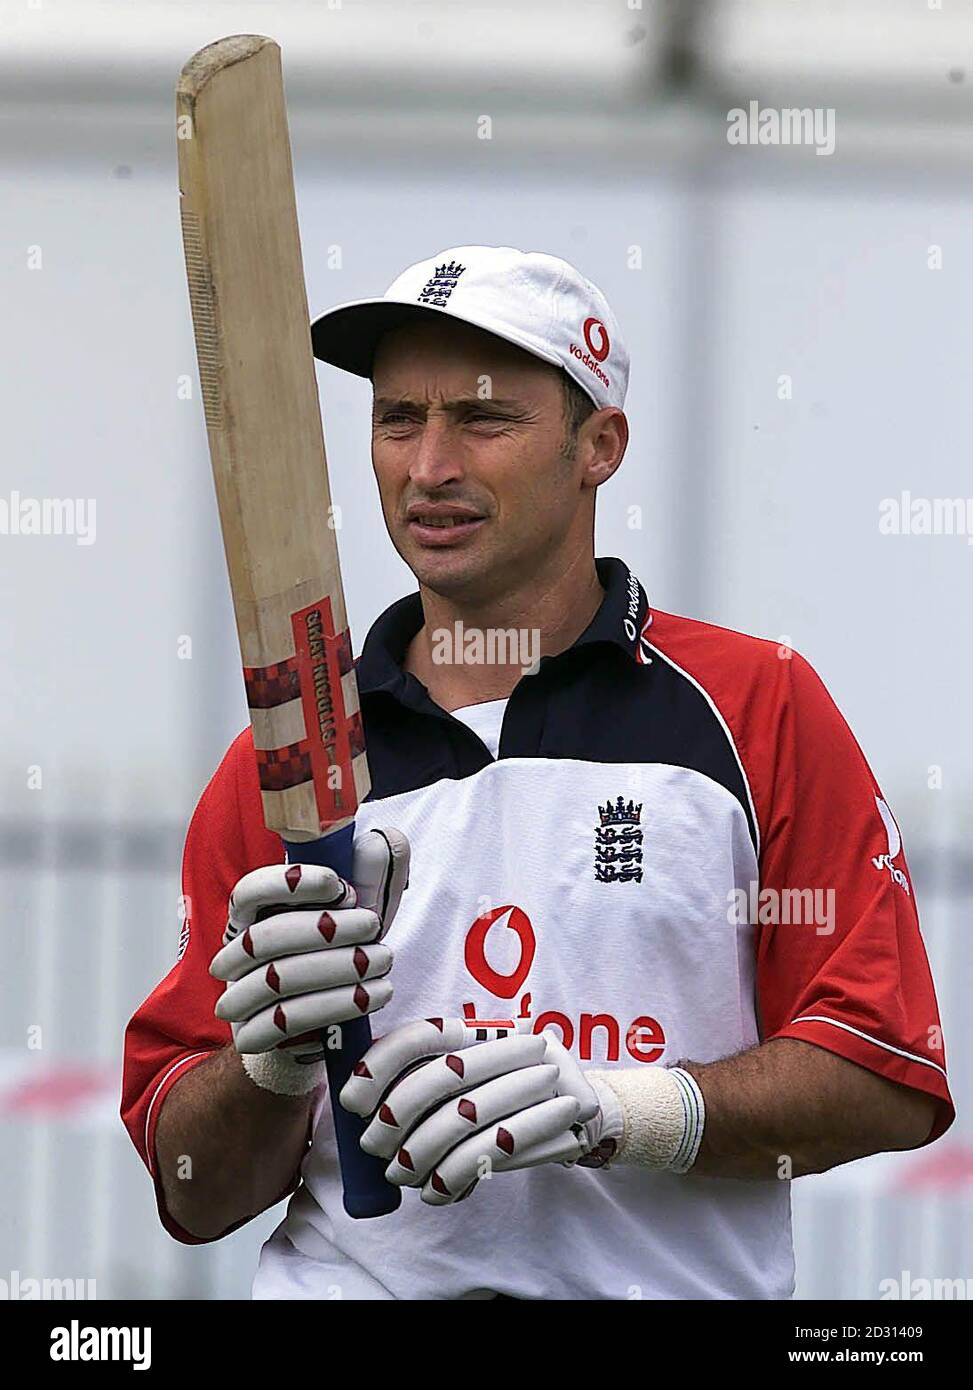 England Captain Nasser Hussain holds his bat during practice at Old Trafford, in Manchester, on the eve of their Third Test cricket match against the West Indies. Stock Photo